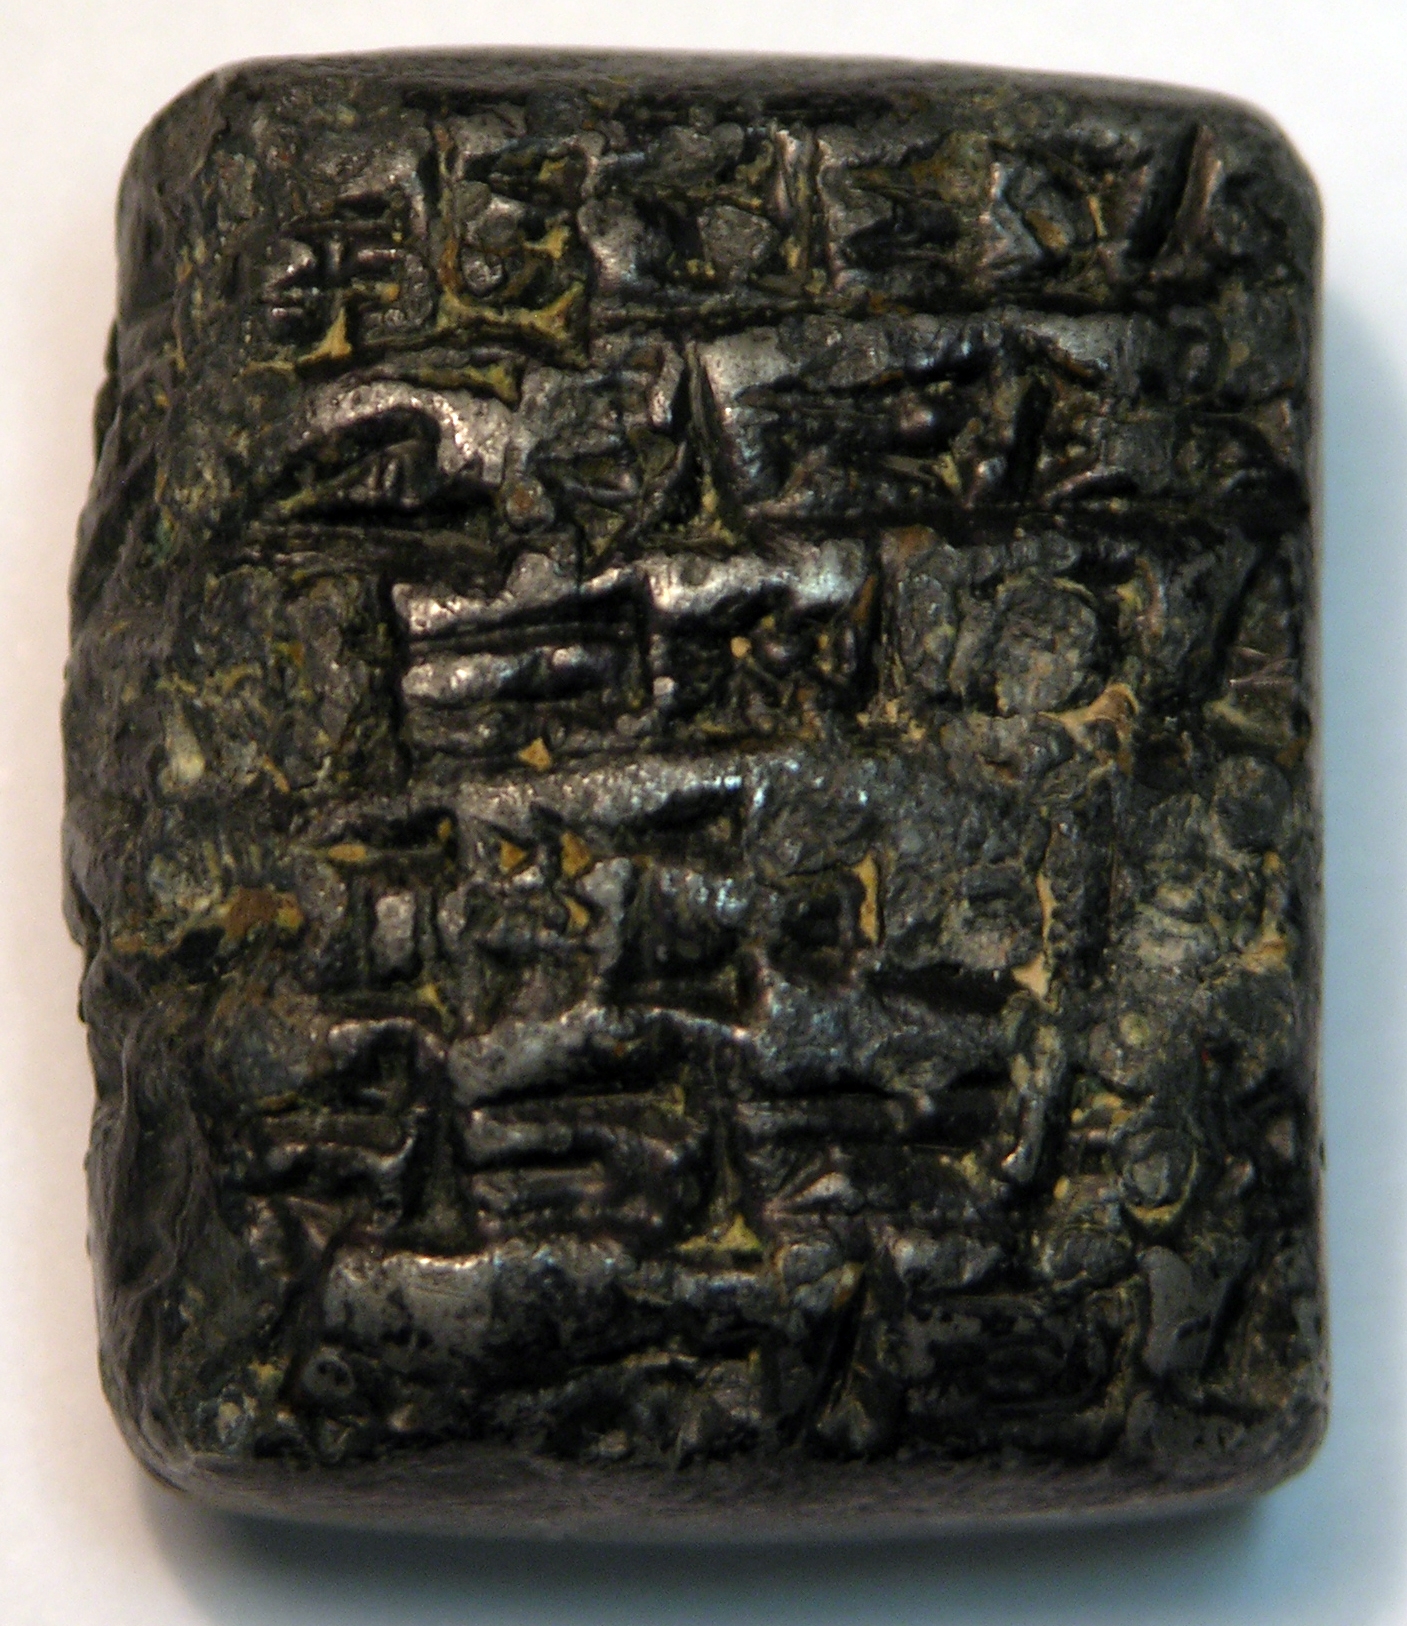 Hearn Tablet ancient Sumerian tablet found in Troup County Georgia